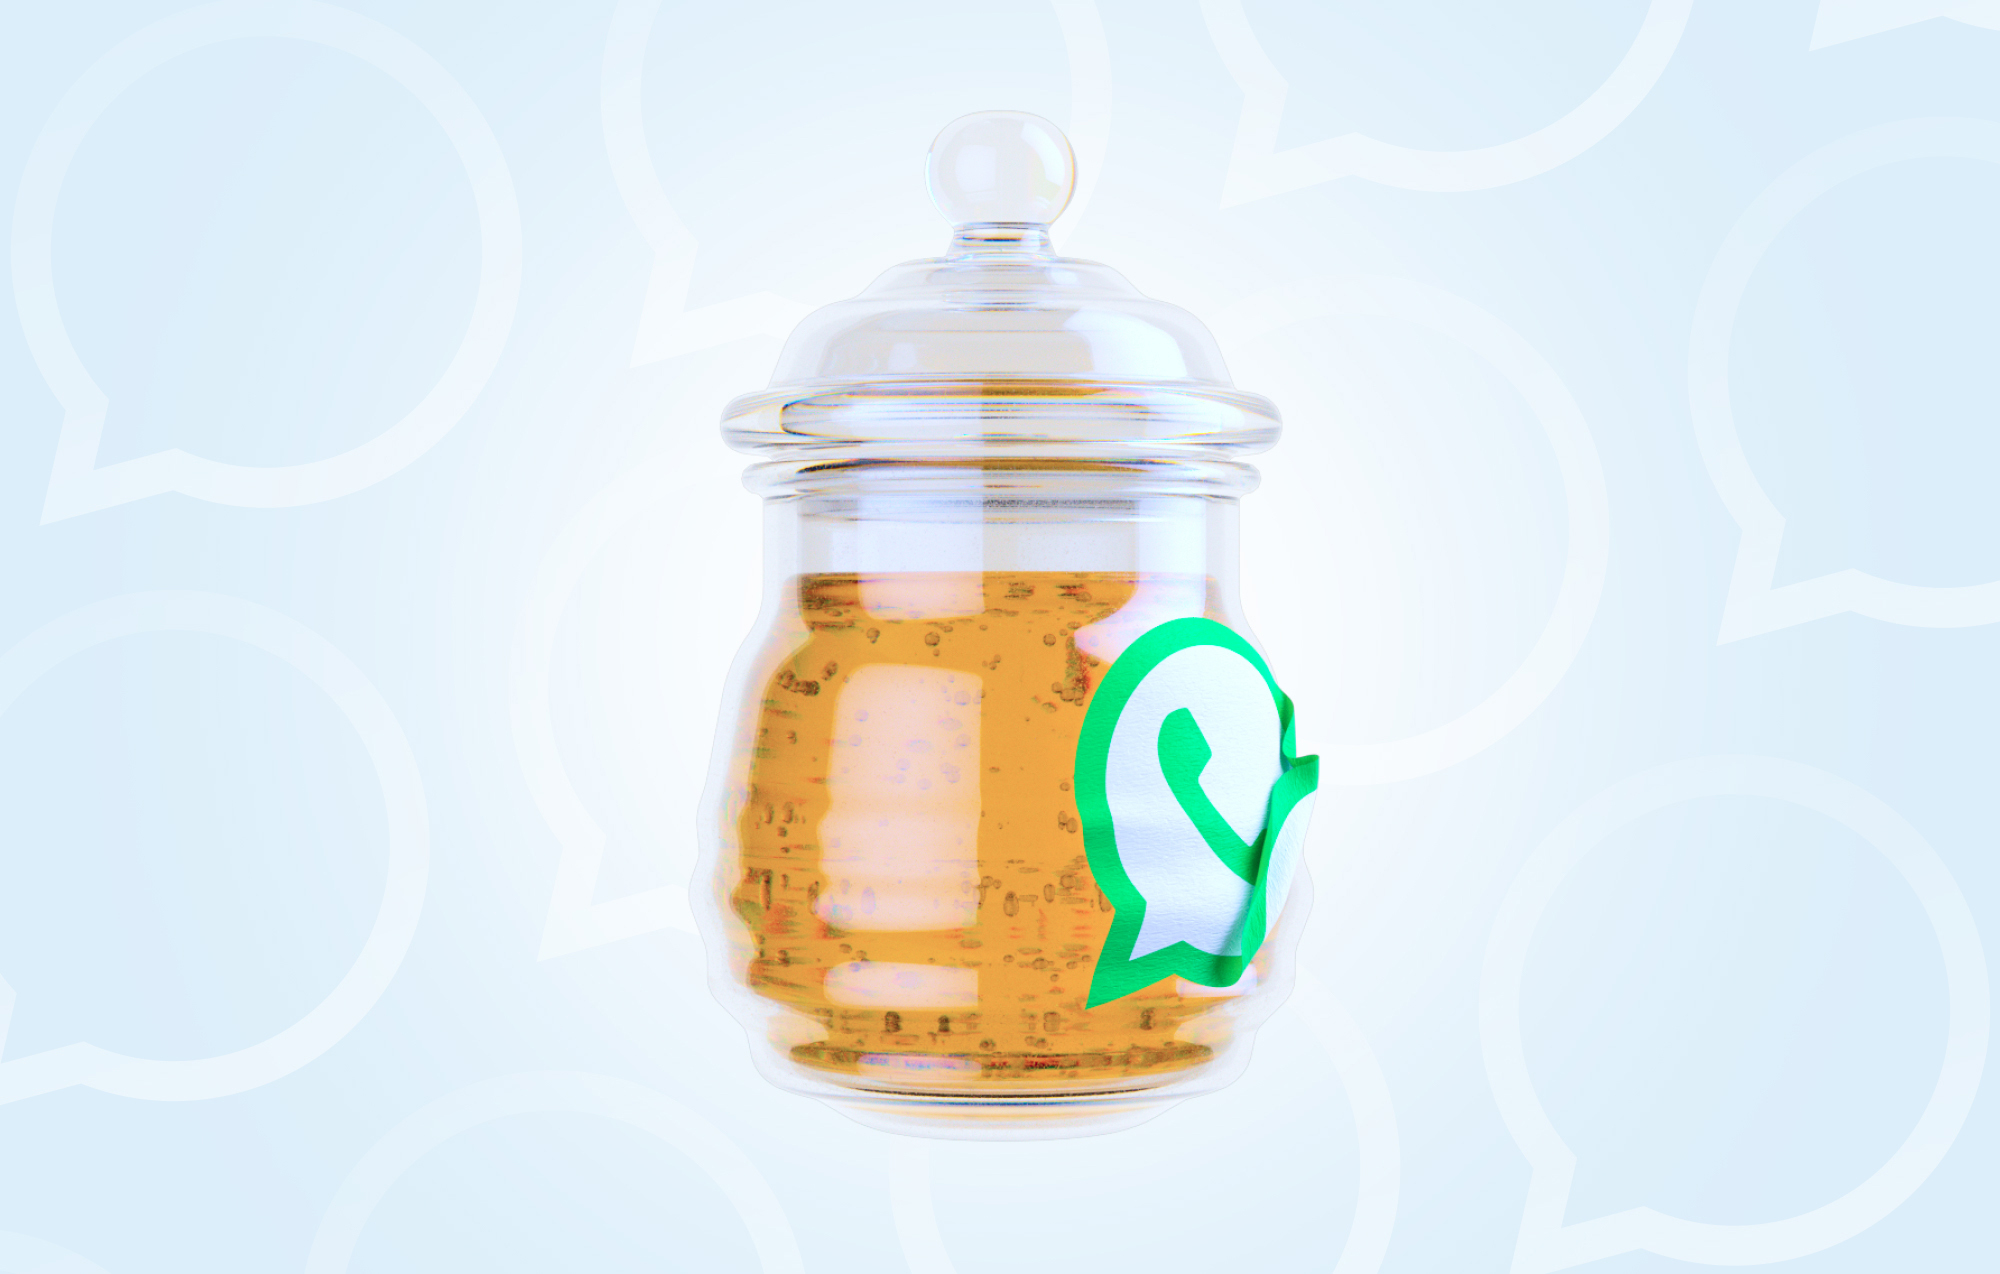 Picture of honey pot with a WhatsApp logo sticker on it – signifying customer retention